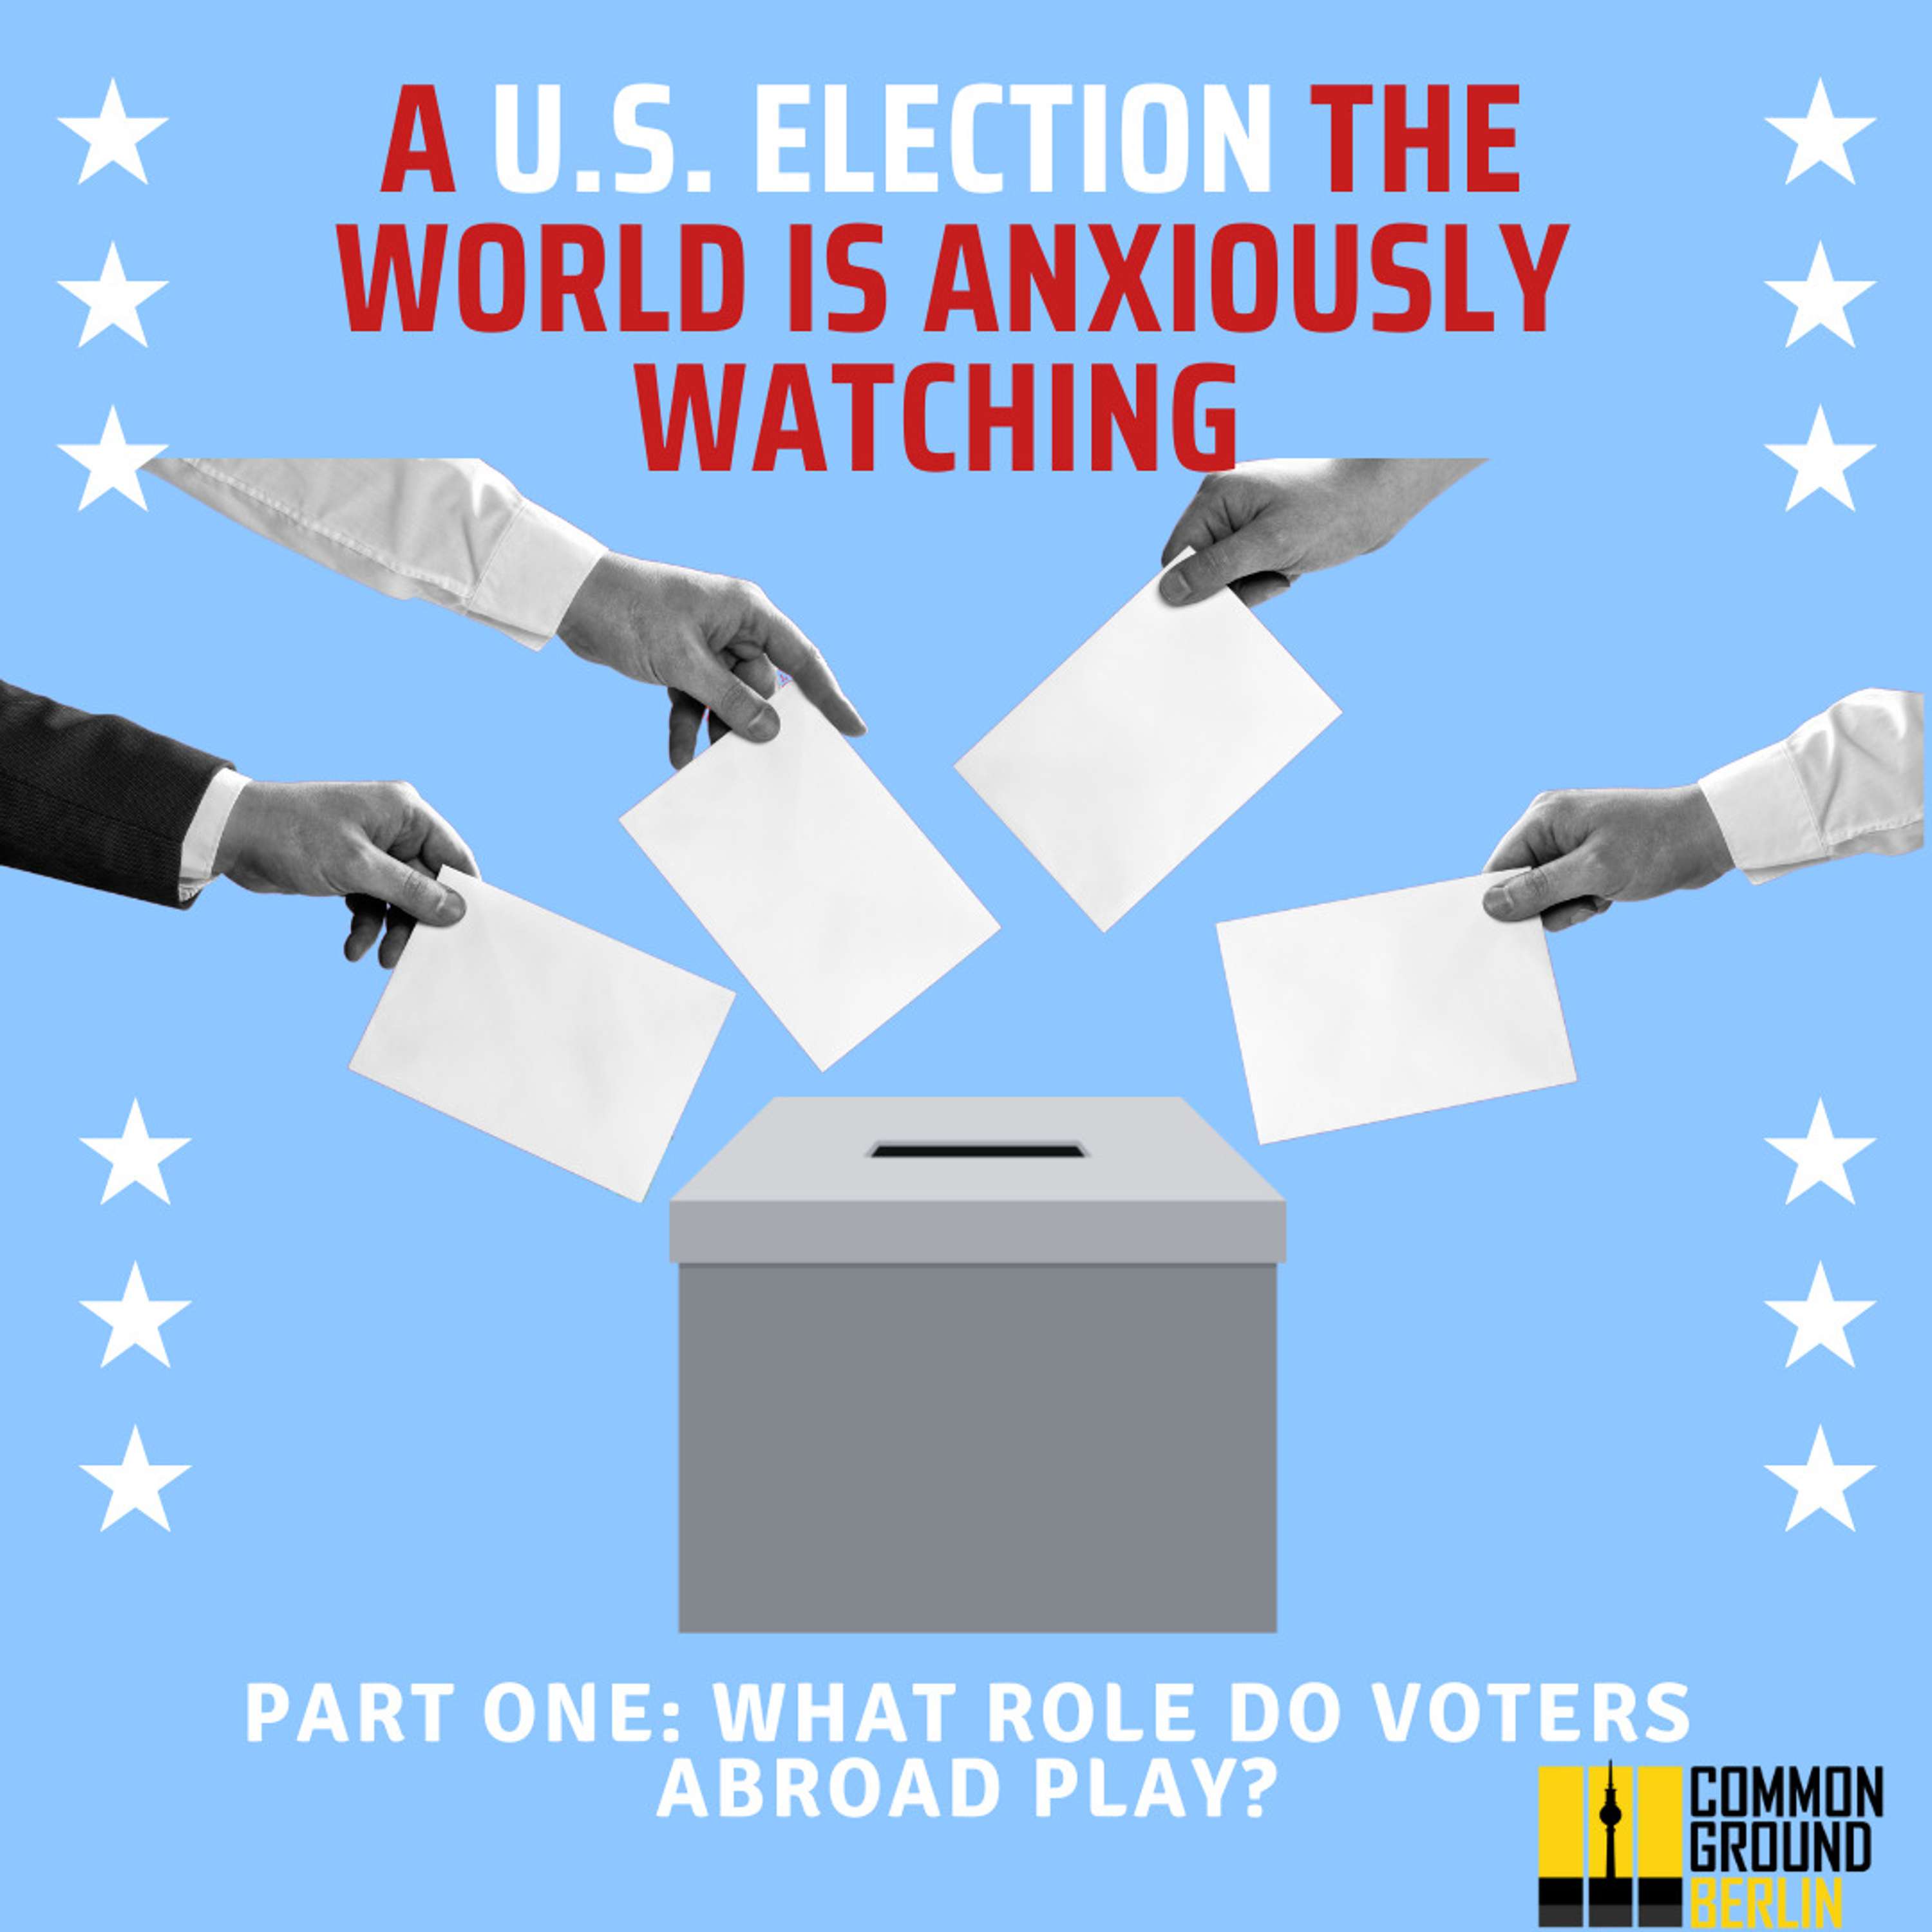 A U.S. election the world is anxiously watching – Part One: What role do voters abroad play?